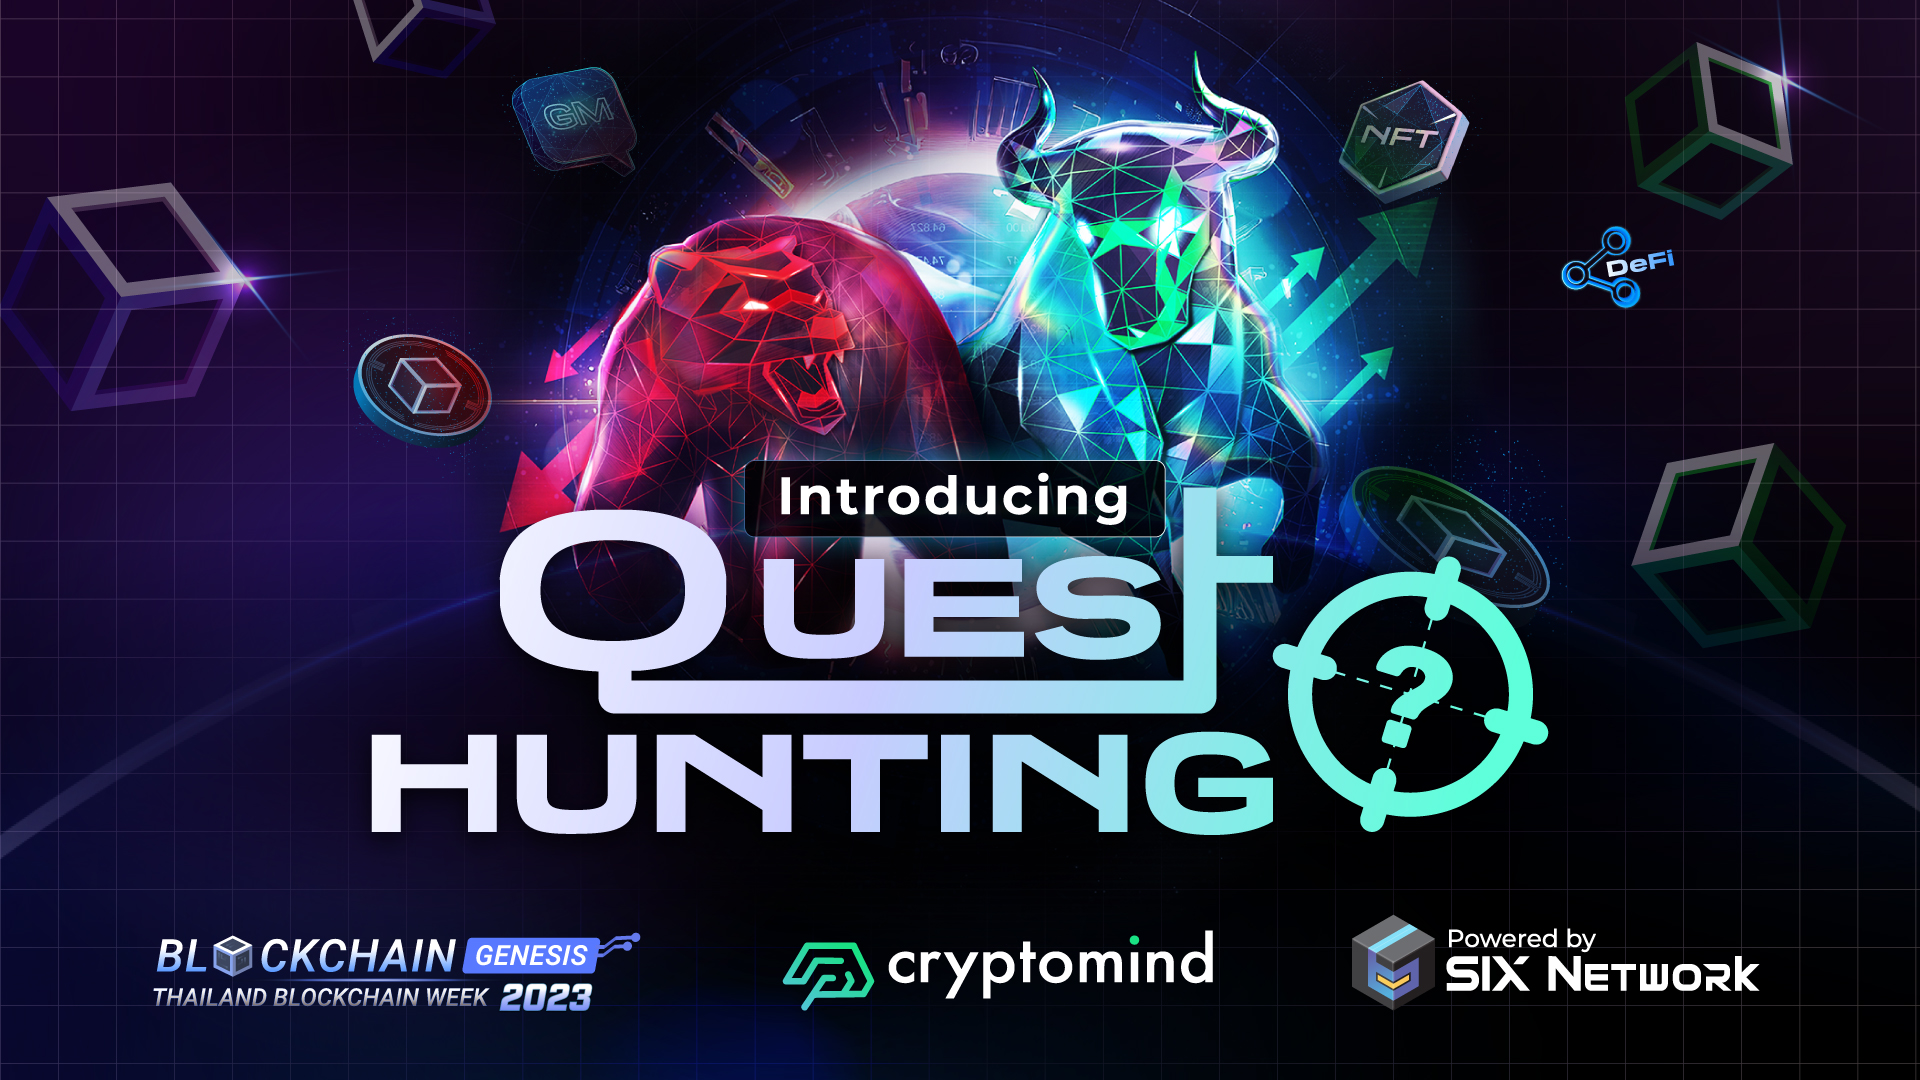 Introducing NFT Quest Hunting Powered by SIX Network: SIX Network Partner with Blockchain Genesis